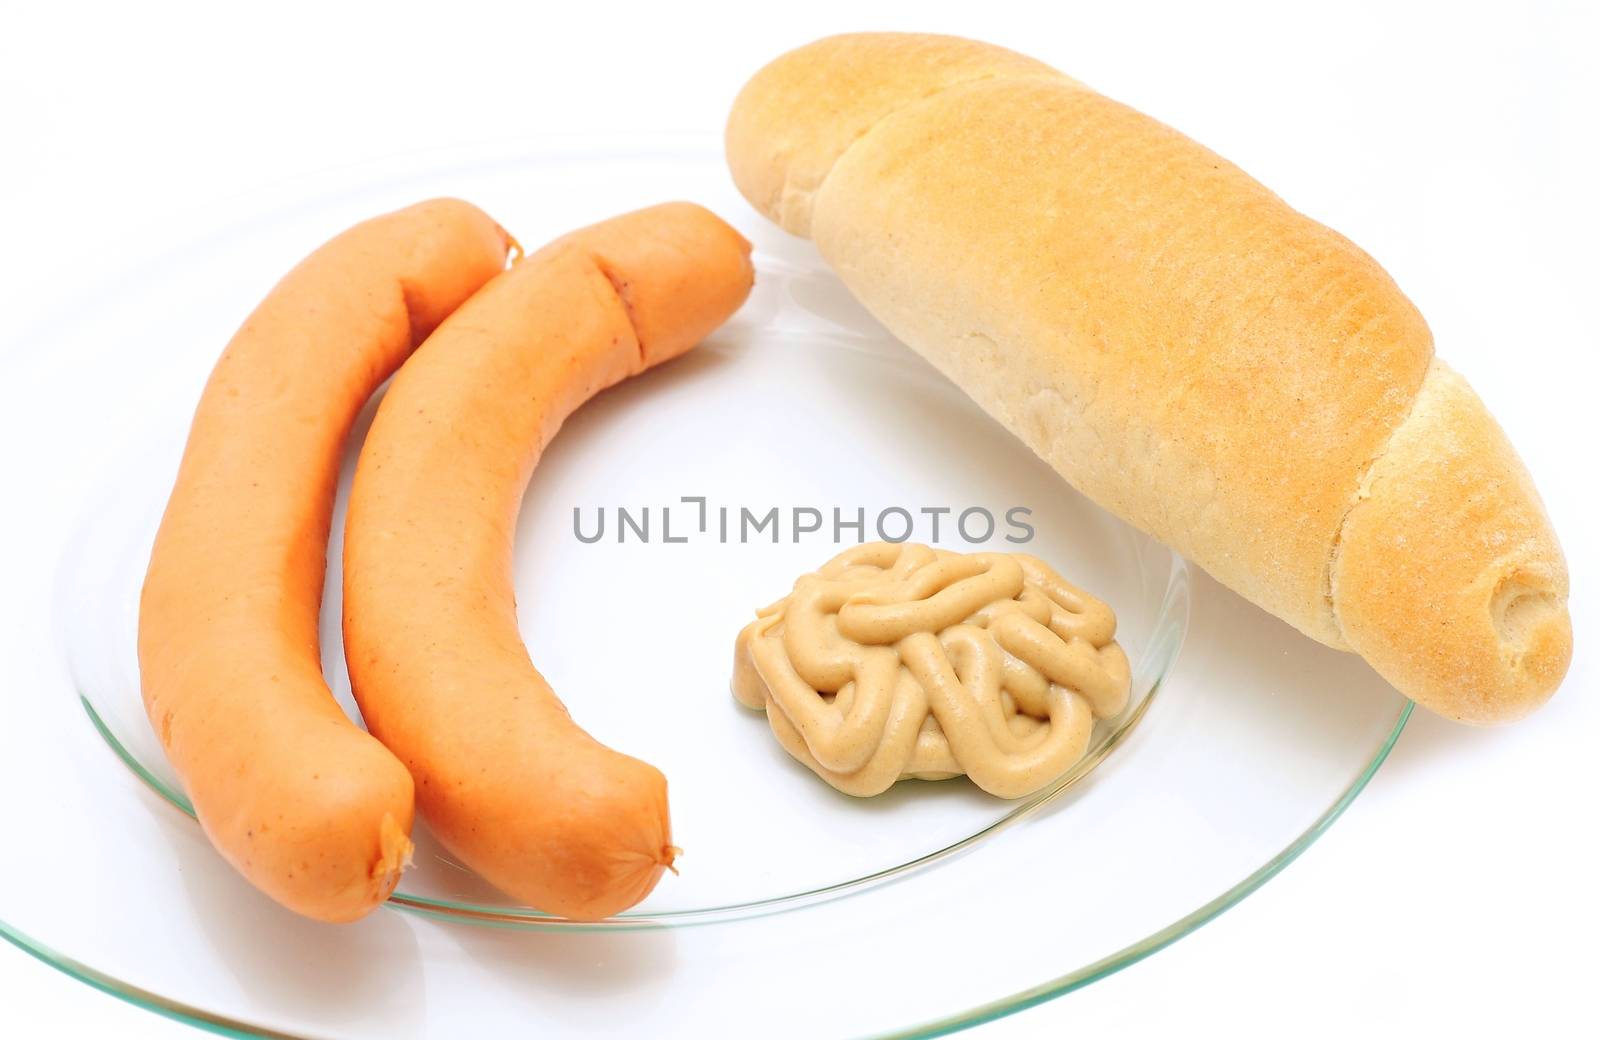 Two frankfurter sausages with mustard and bread roll by hamik